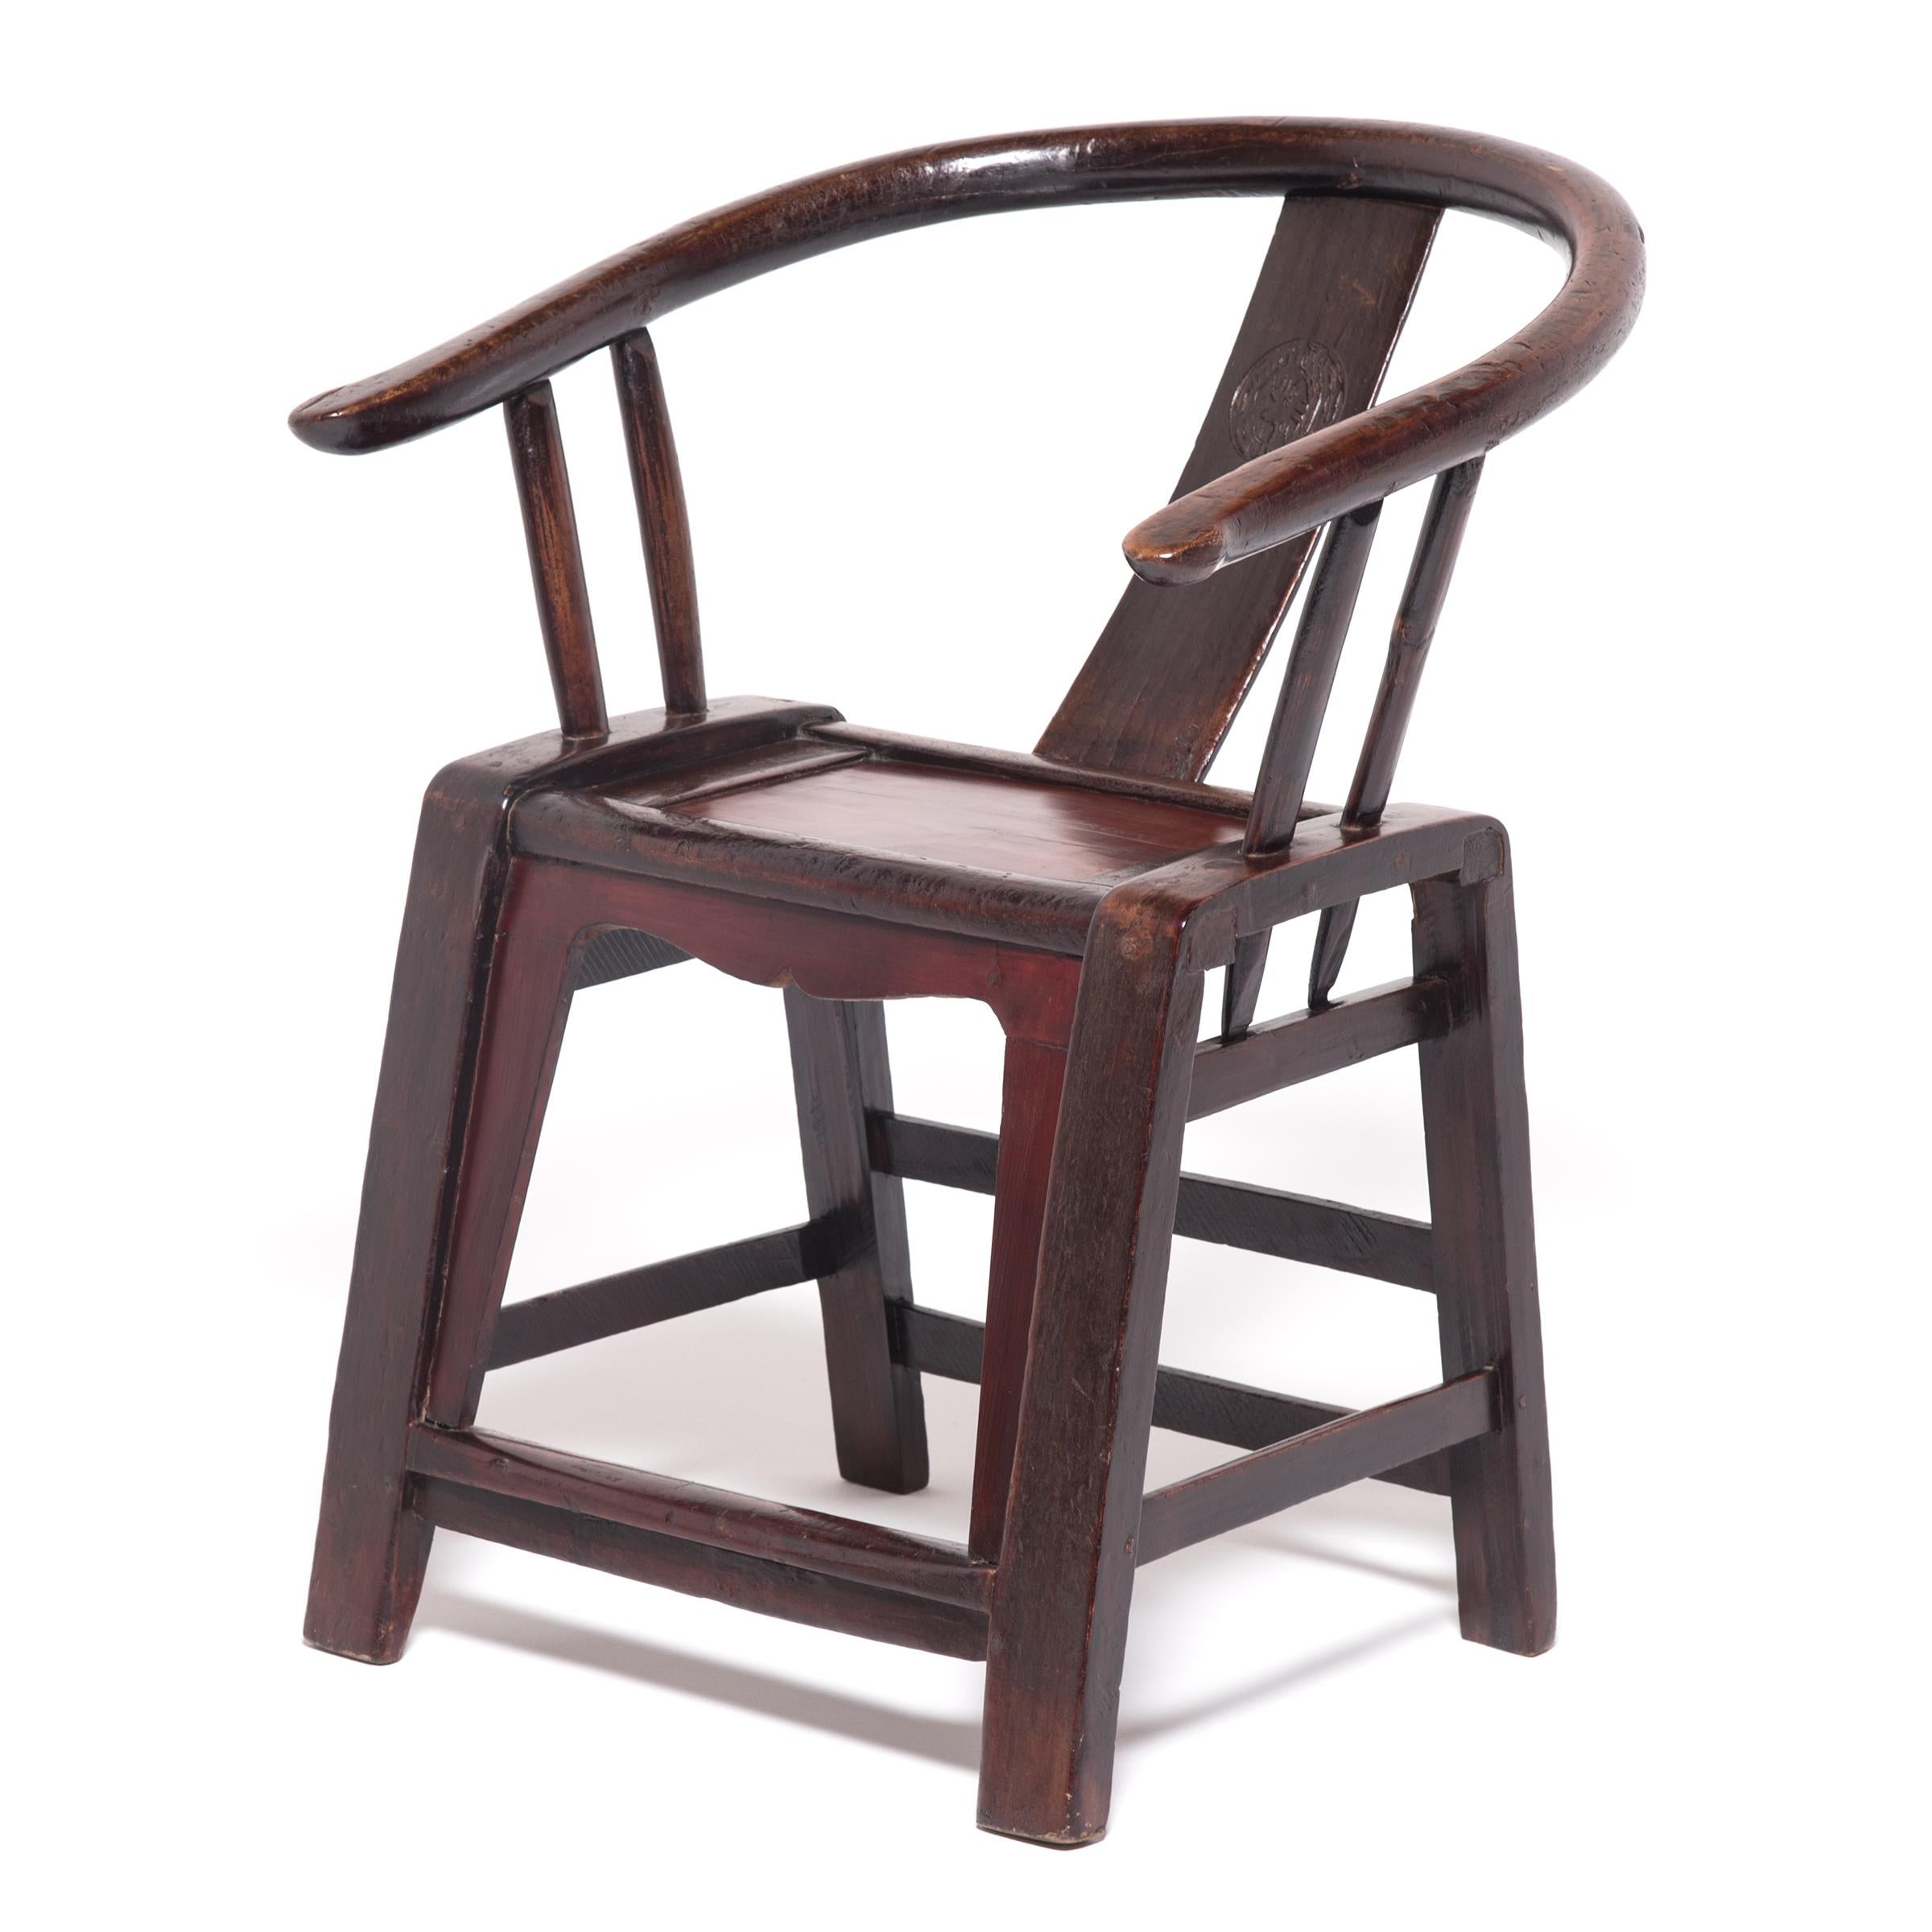 Prior to the 19th century, Chinese society eschewed raised seats in favor of mats. The rising popularity of chairs and other forms of elevated seating led craftsmen to adapt traditional cabinetry and architecture techniques to the human body. In the